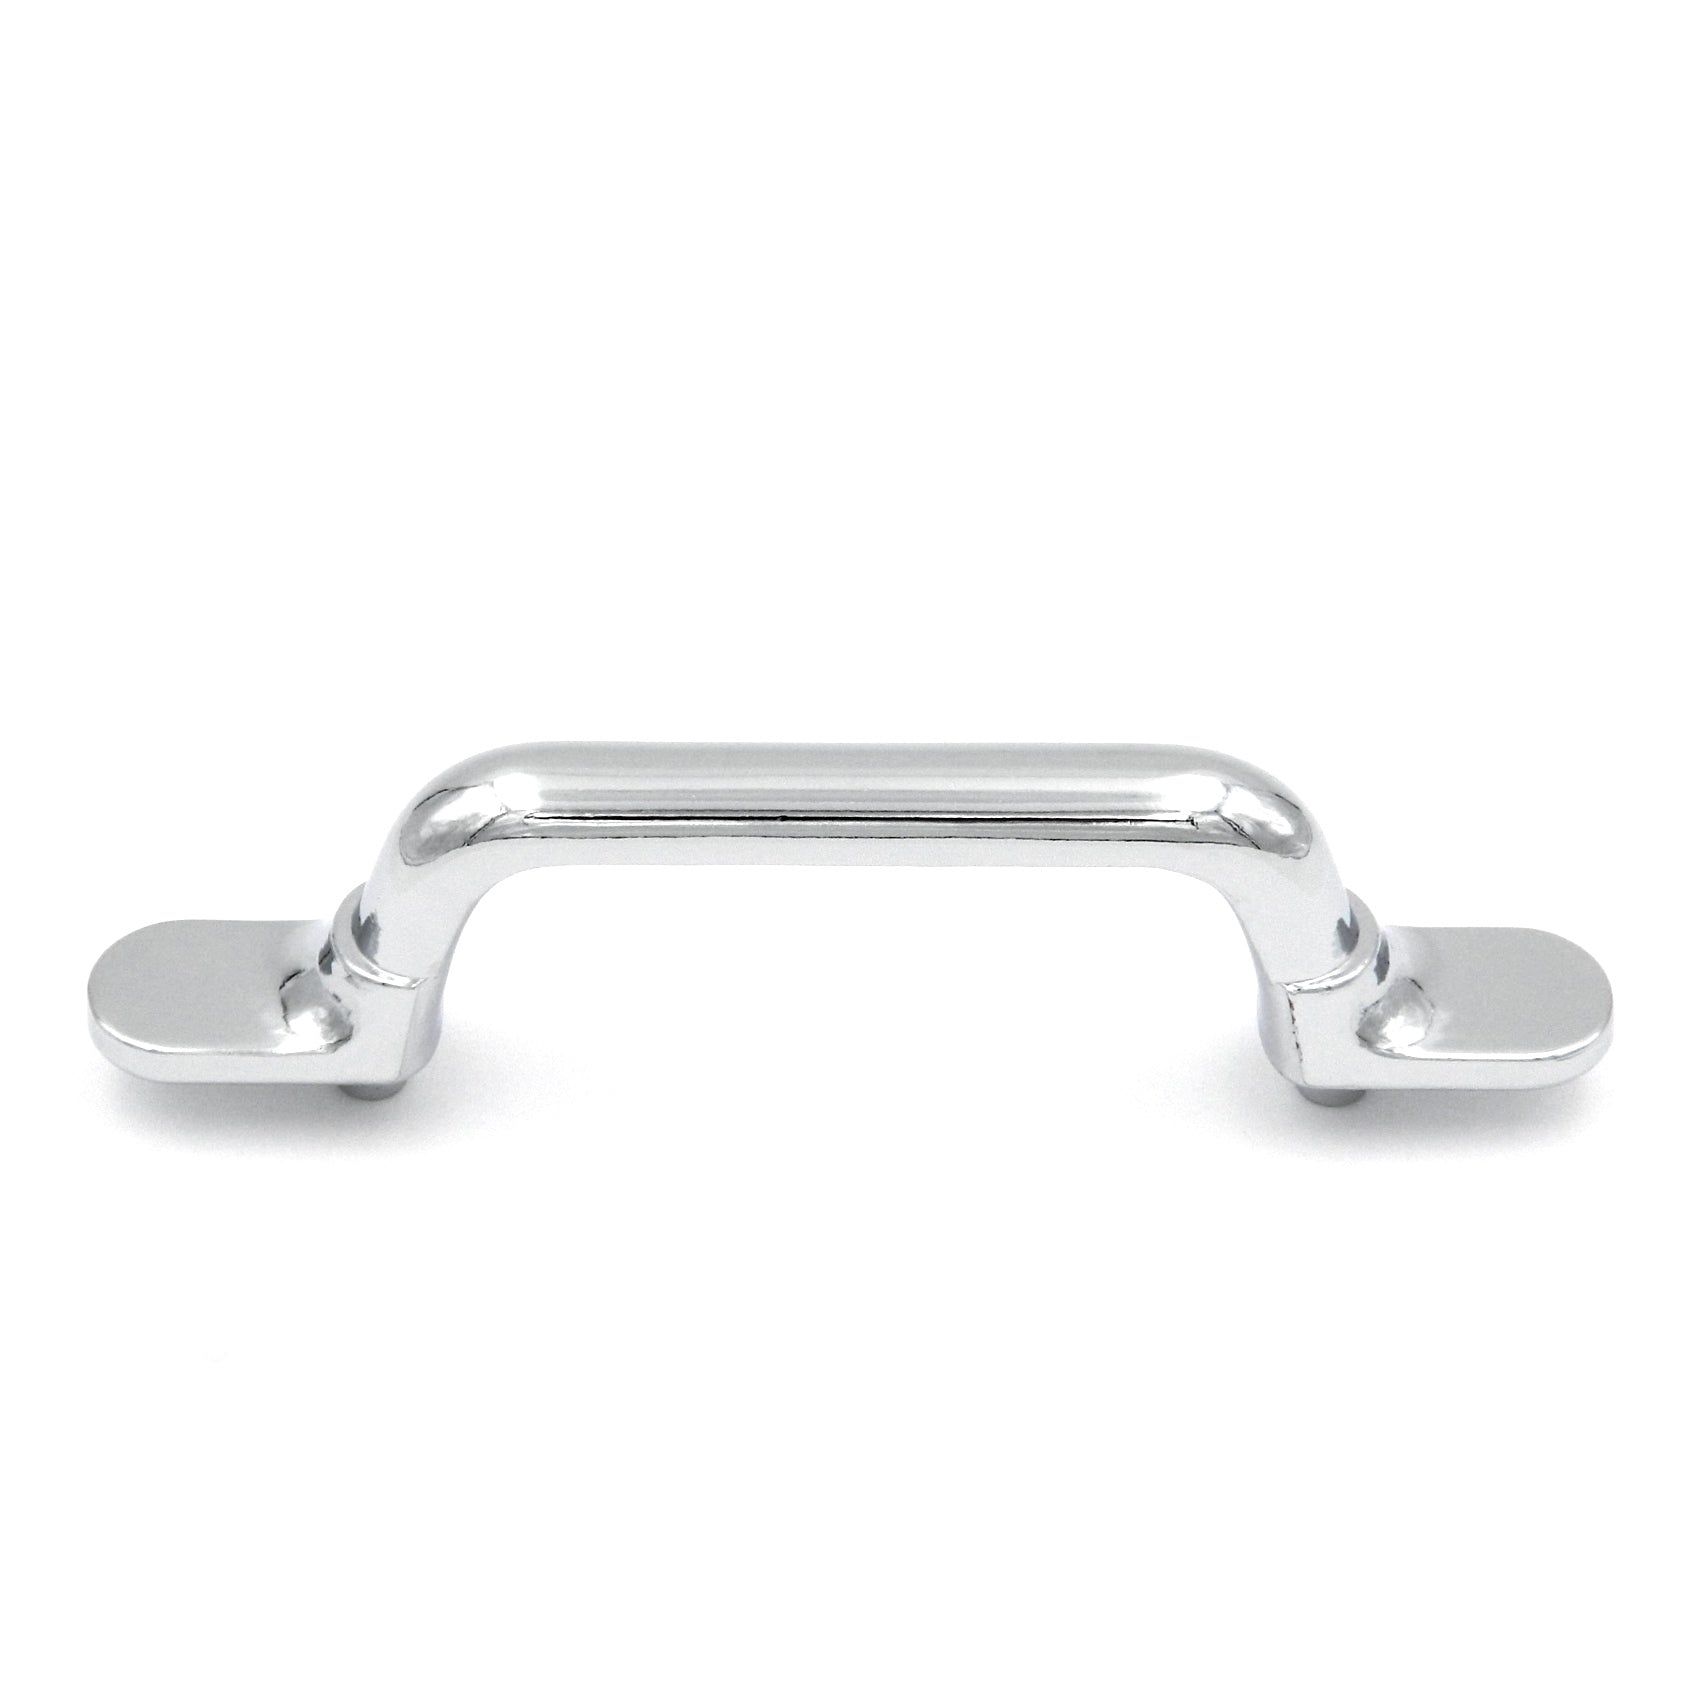 Hickory Hardware Tranquility Chrome 3"cc Handle Pull P8320-CH